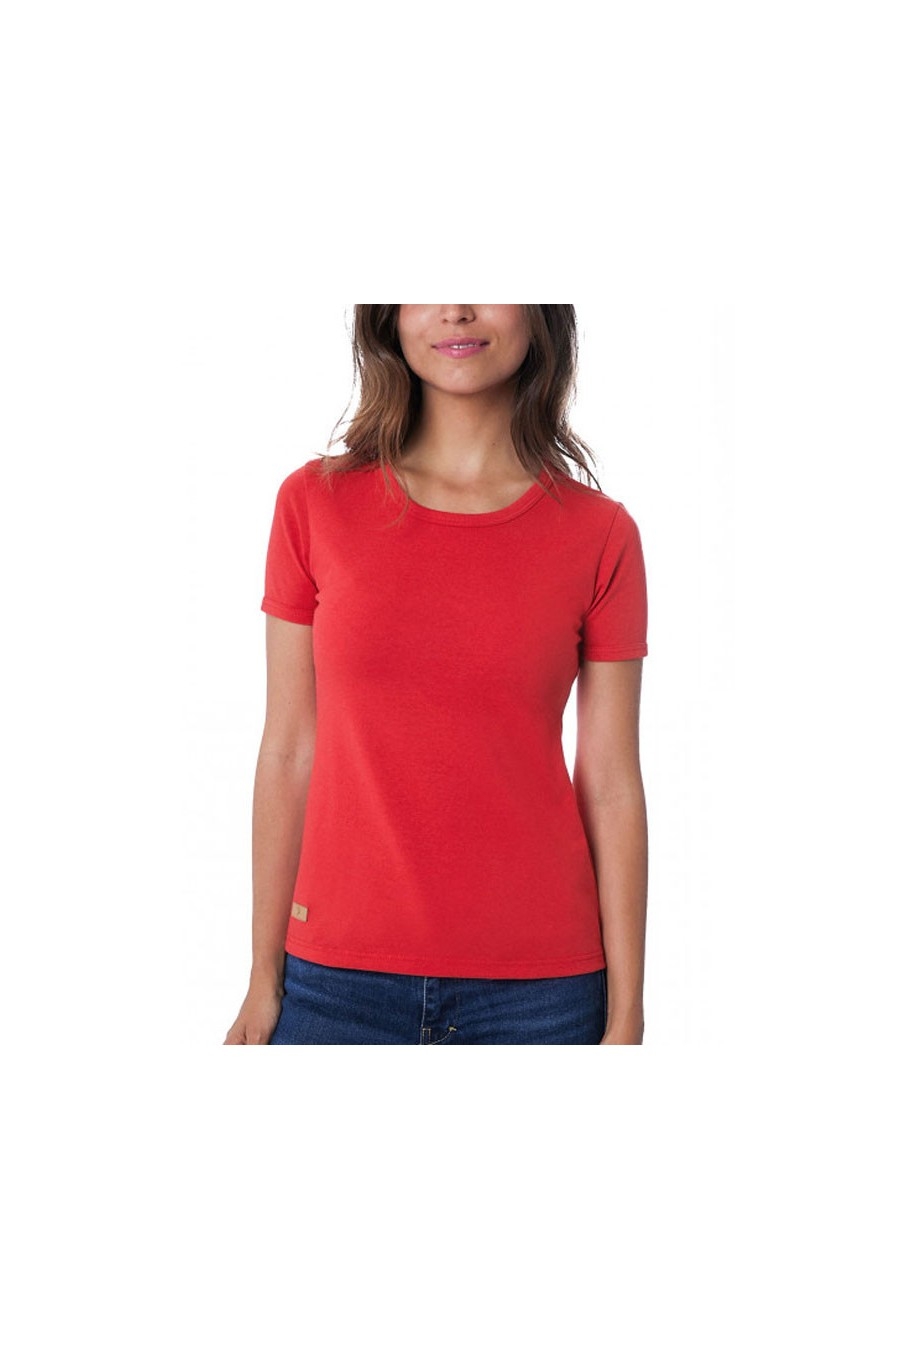 T-SHIRT FEMME MANCHE COURTE COL ROND ROUGE - Made in France & 100% Recyclé